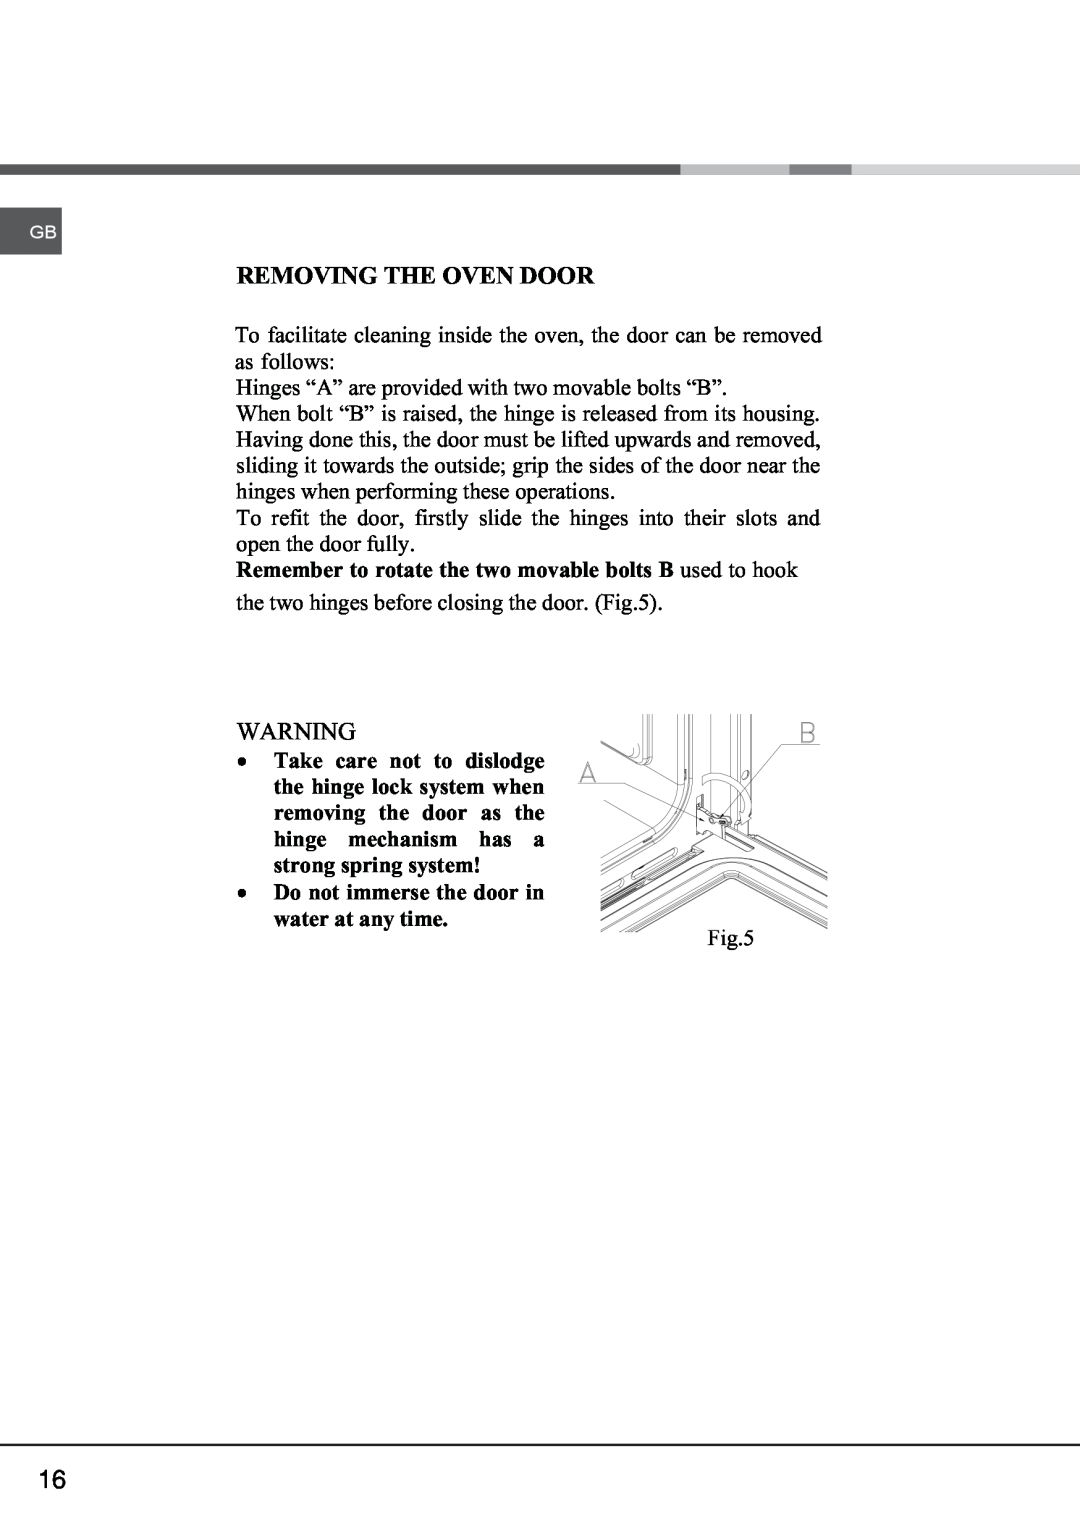 Hotpoint SY23 manual Removing The Oven Door 